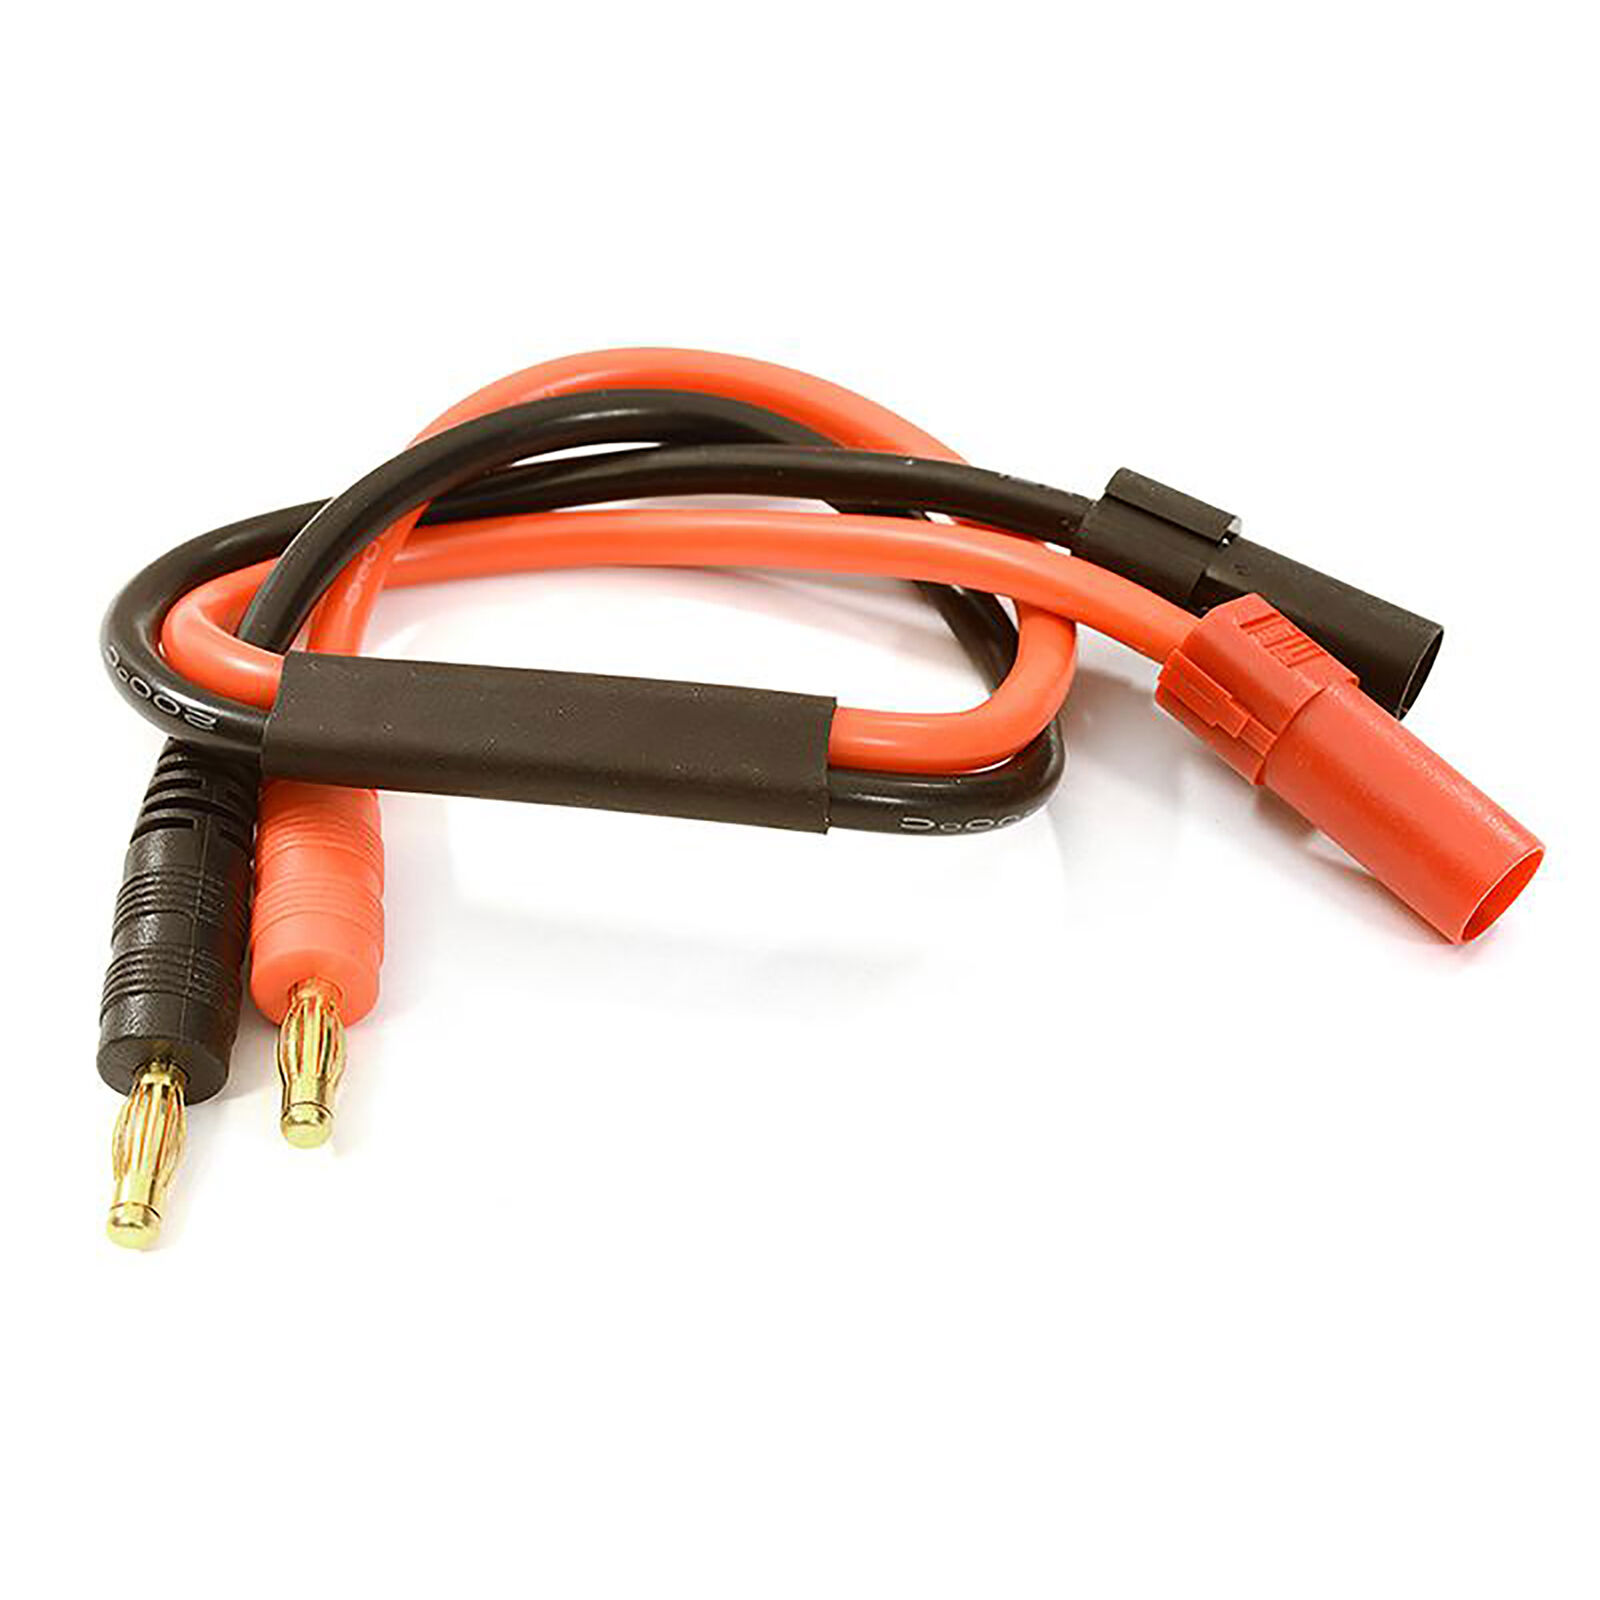 XT150 Charge Cable Wire Harness with Banana Plugs